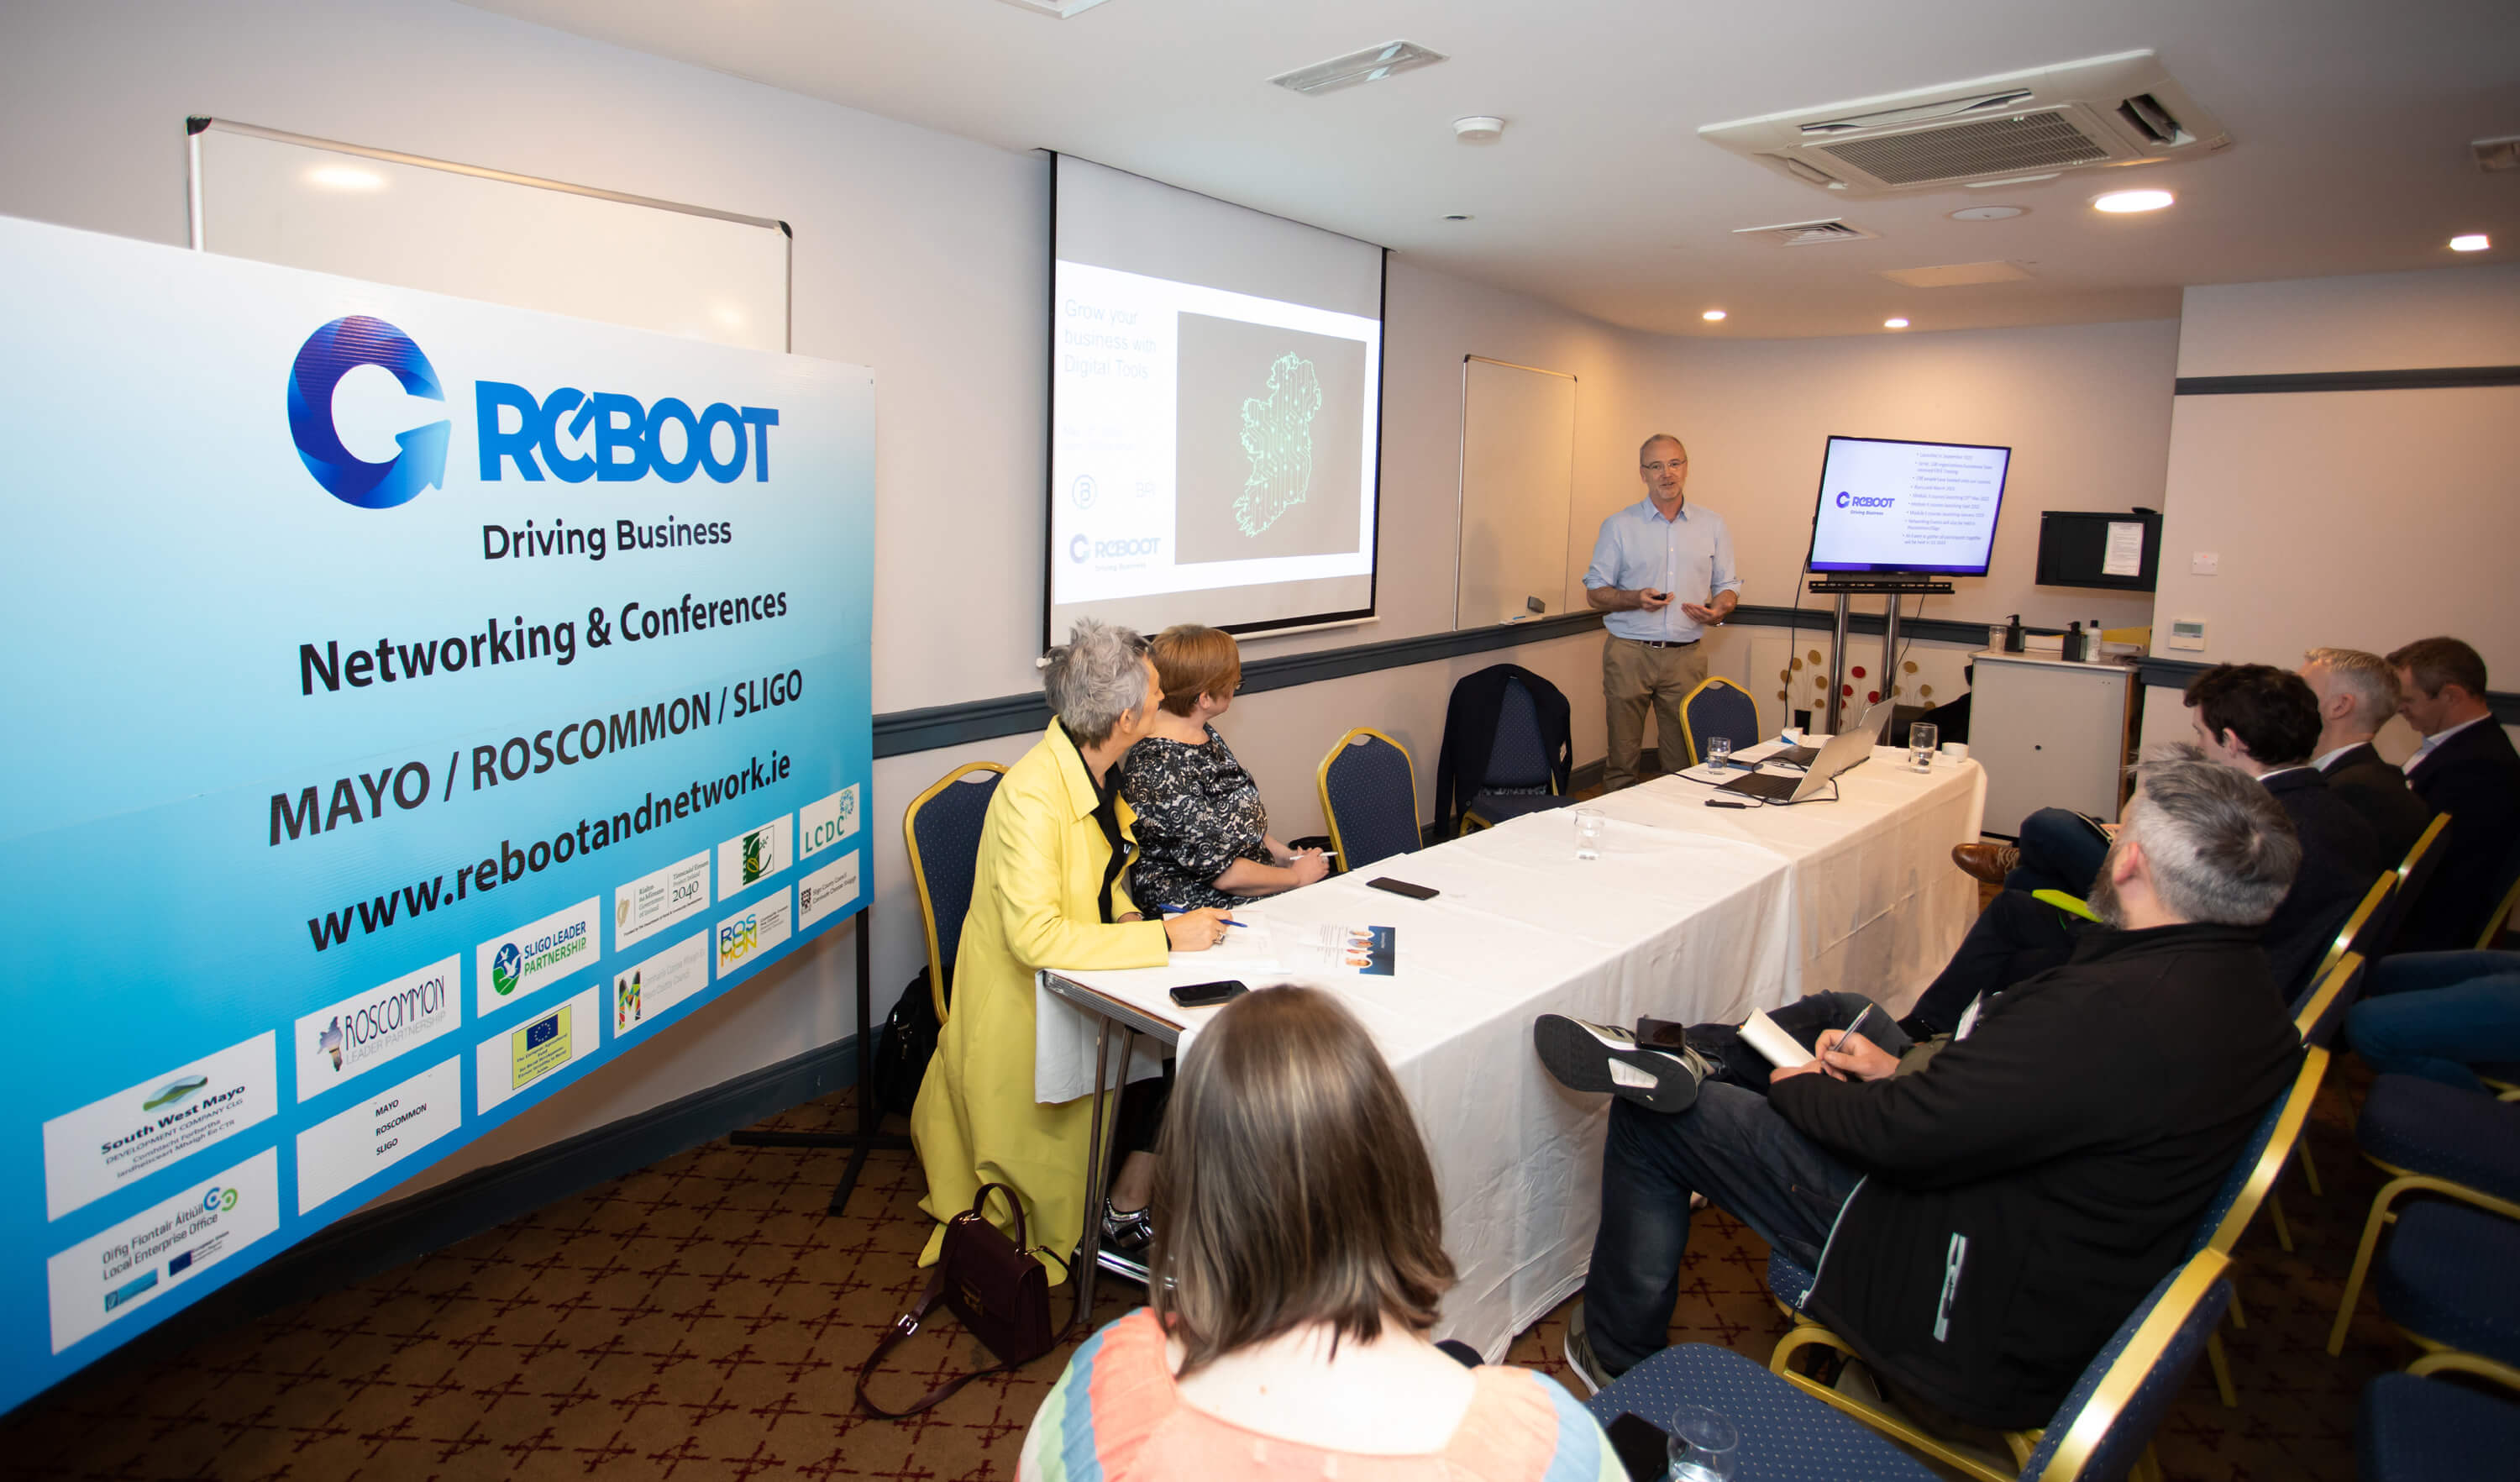 How to use Digital Tools for Business & Networking Event